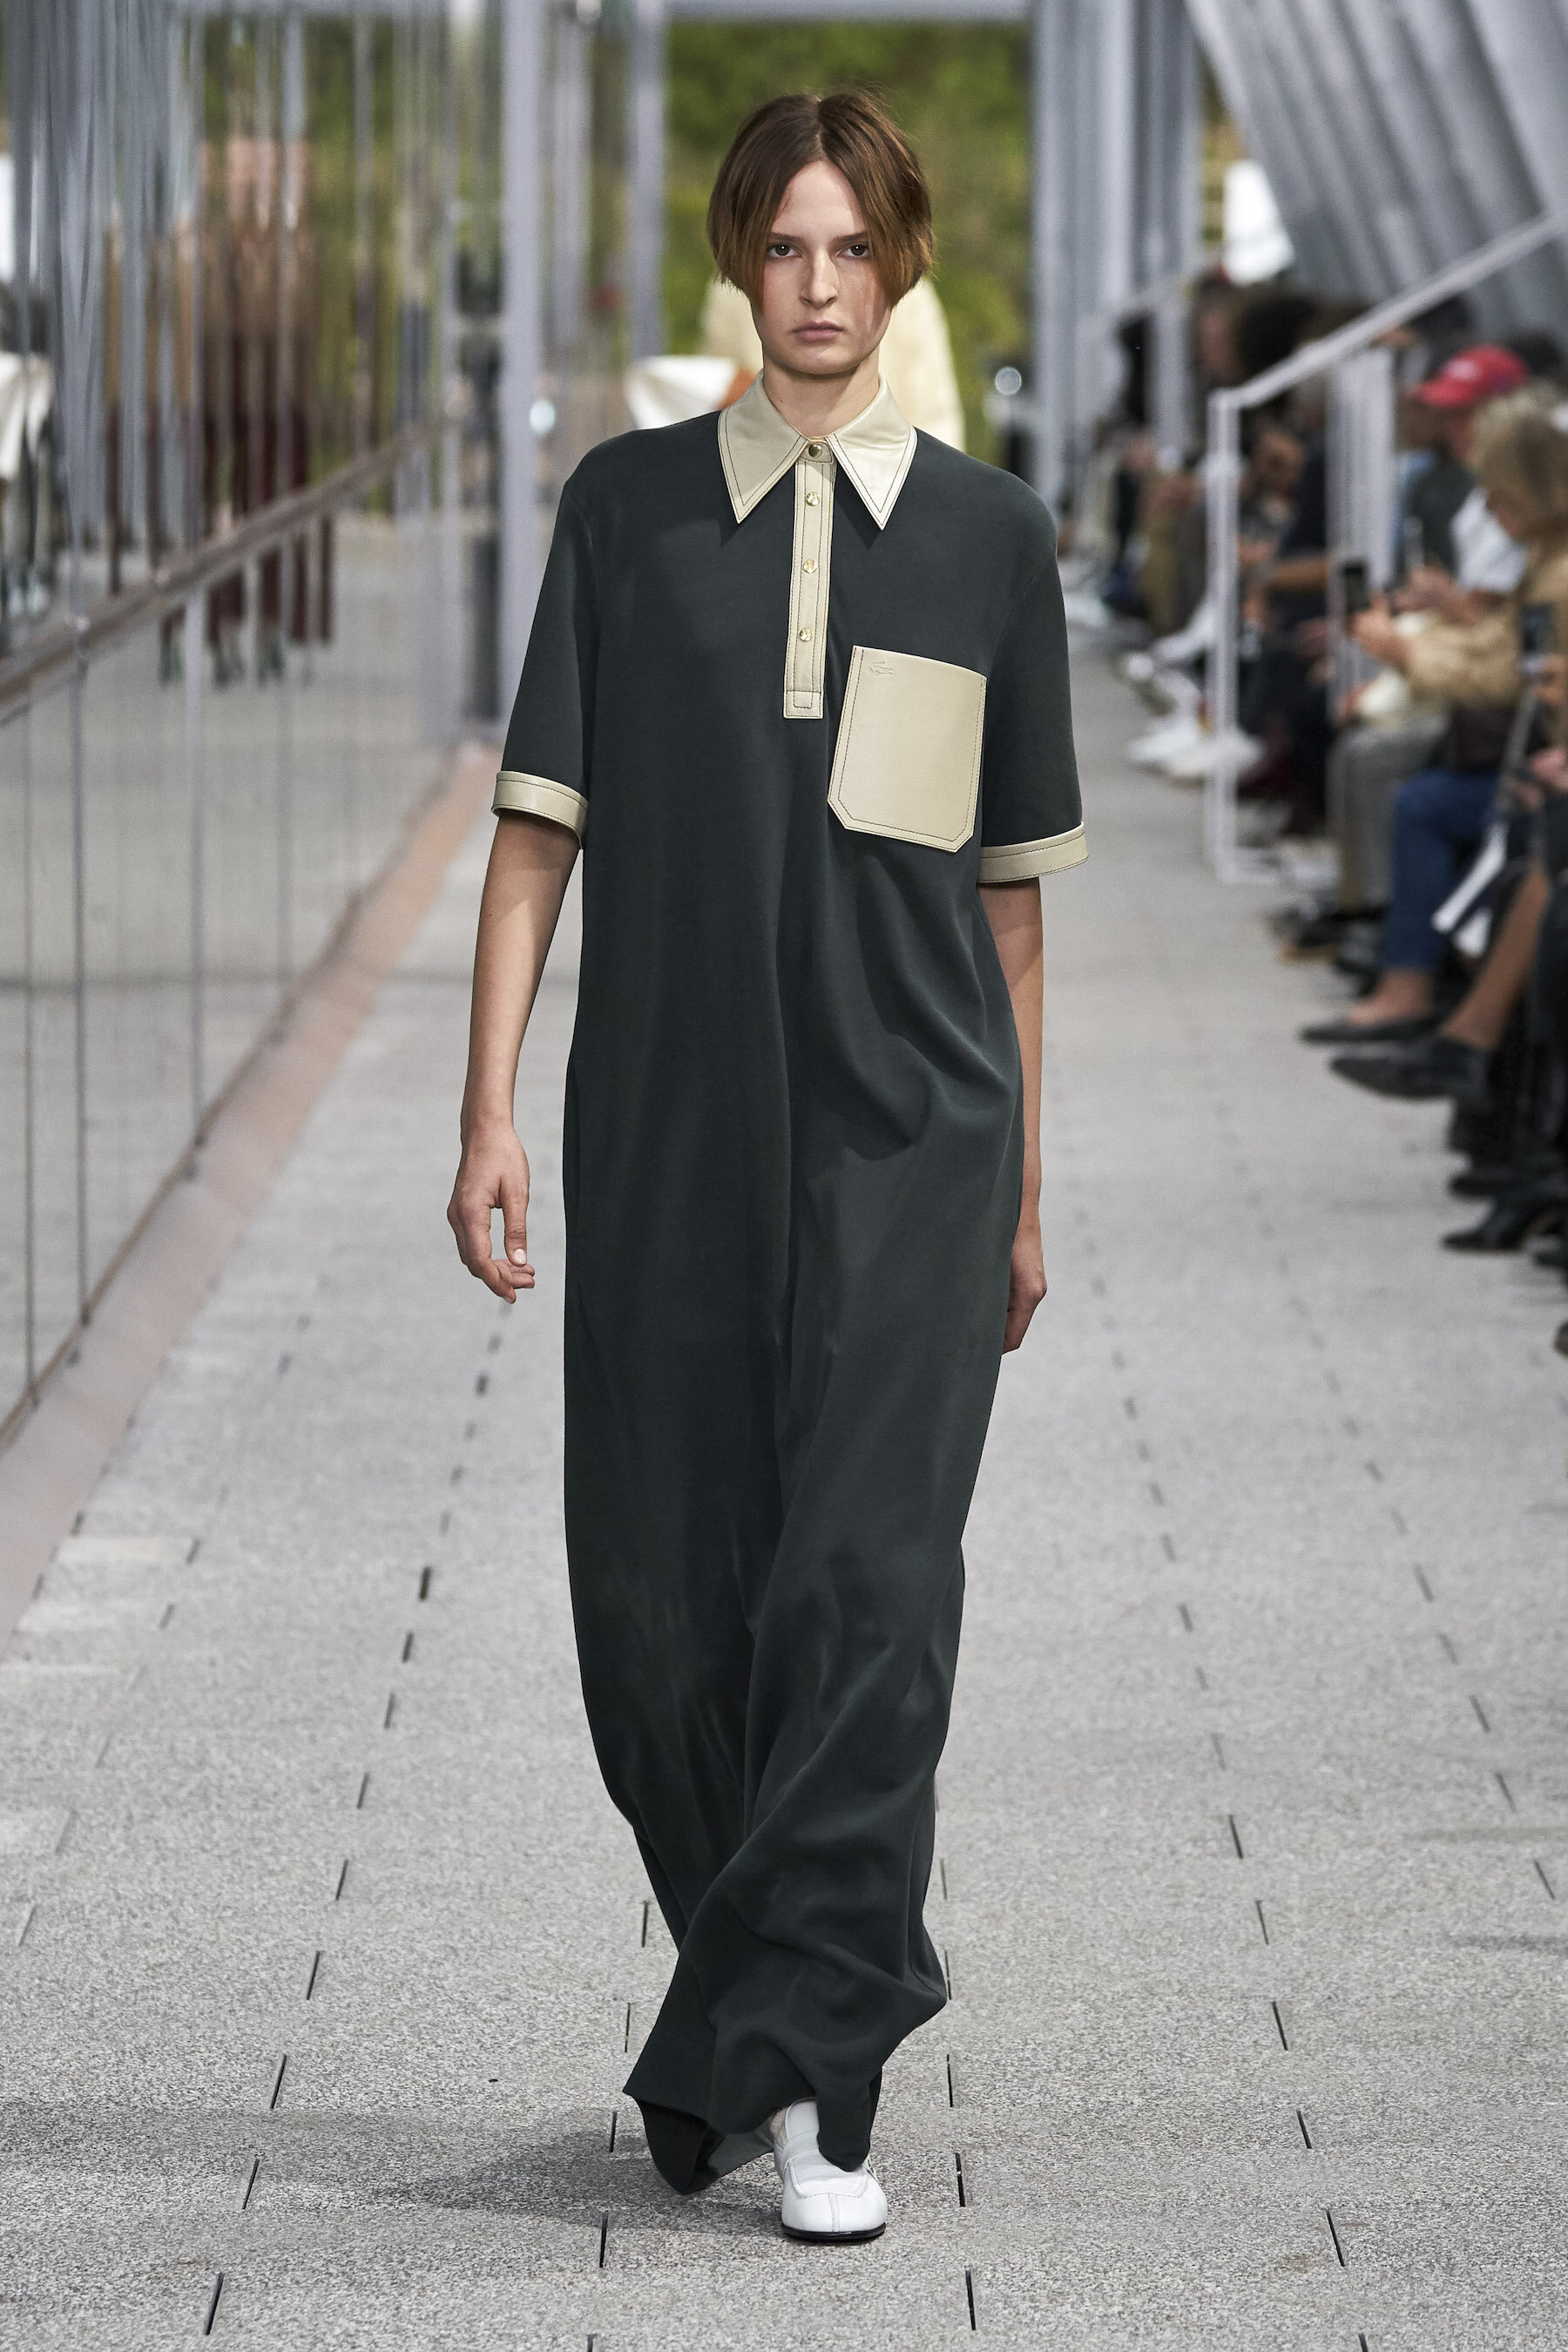 Lacoste SS20_LOOK 04 by Alessandro Lucioni  Imaxtree.com.jpg